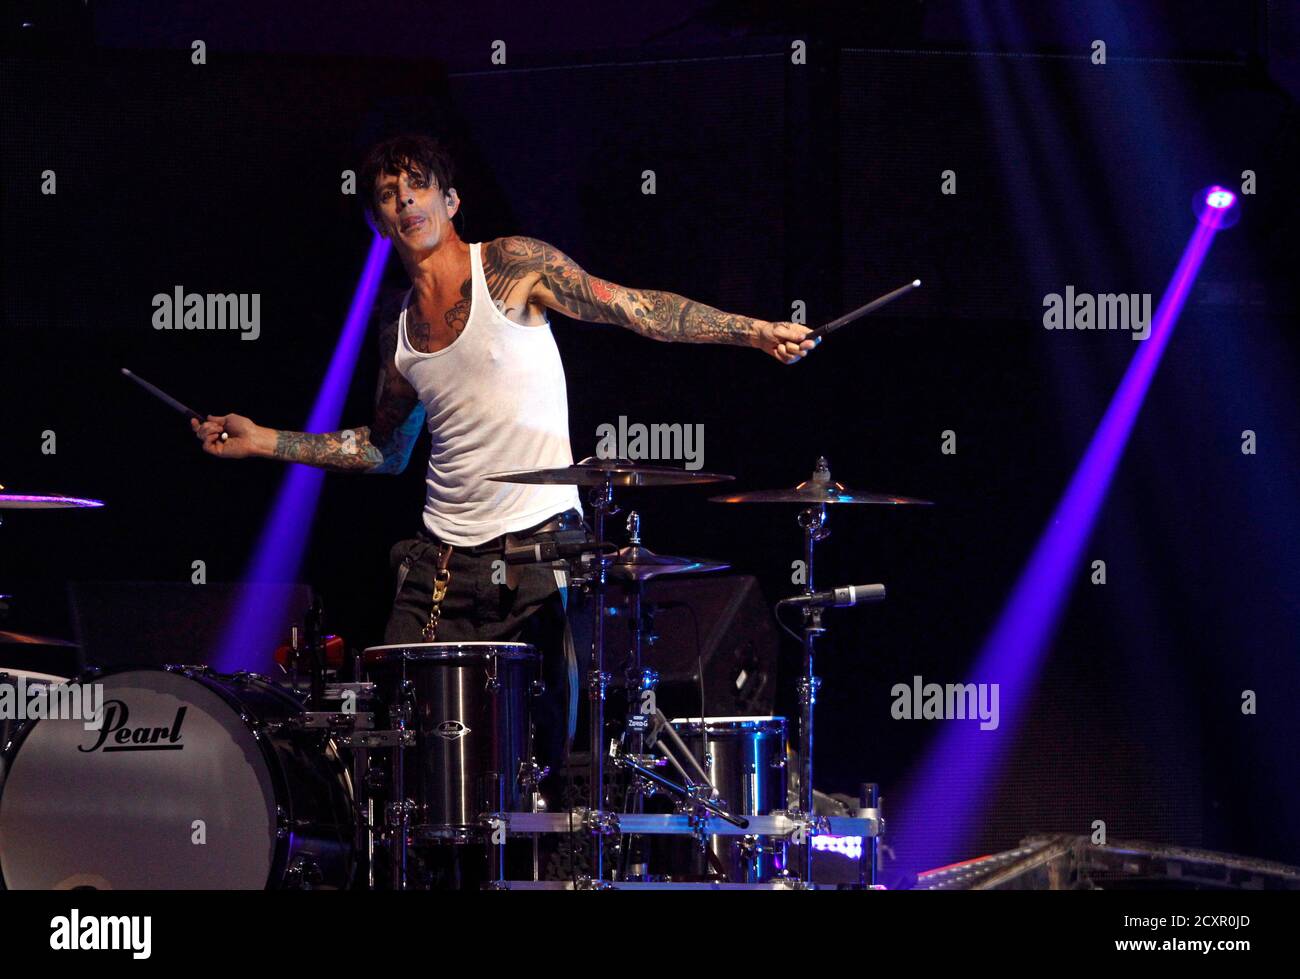 Motley Crue drummer Tommy Lee performs during the 2014 iHeartRadio Music  Festival in Las Vegas, Nevada September 19, 2014. REUTERS/Steve Marcus  (UNITED STATES - Tags: ENTERTAINMENT Stock Photo - Alamy